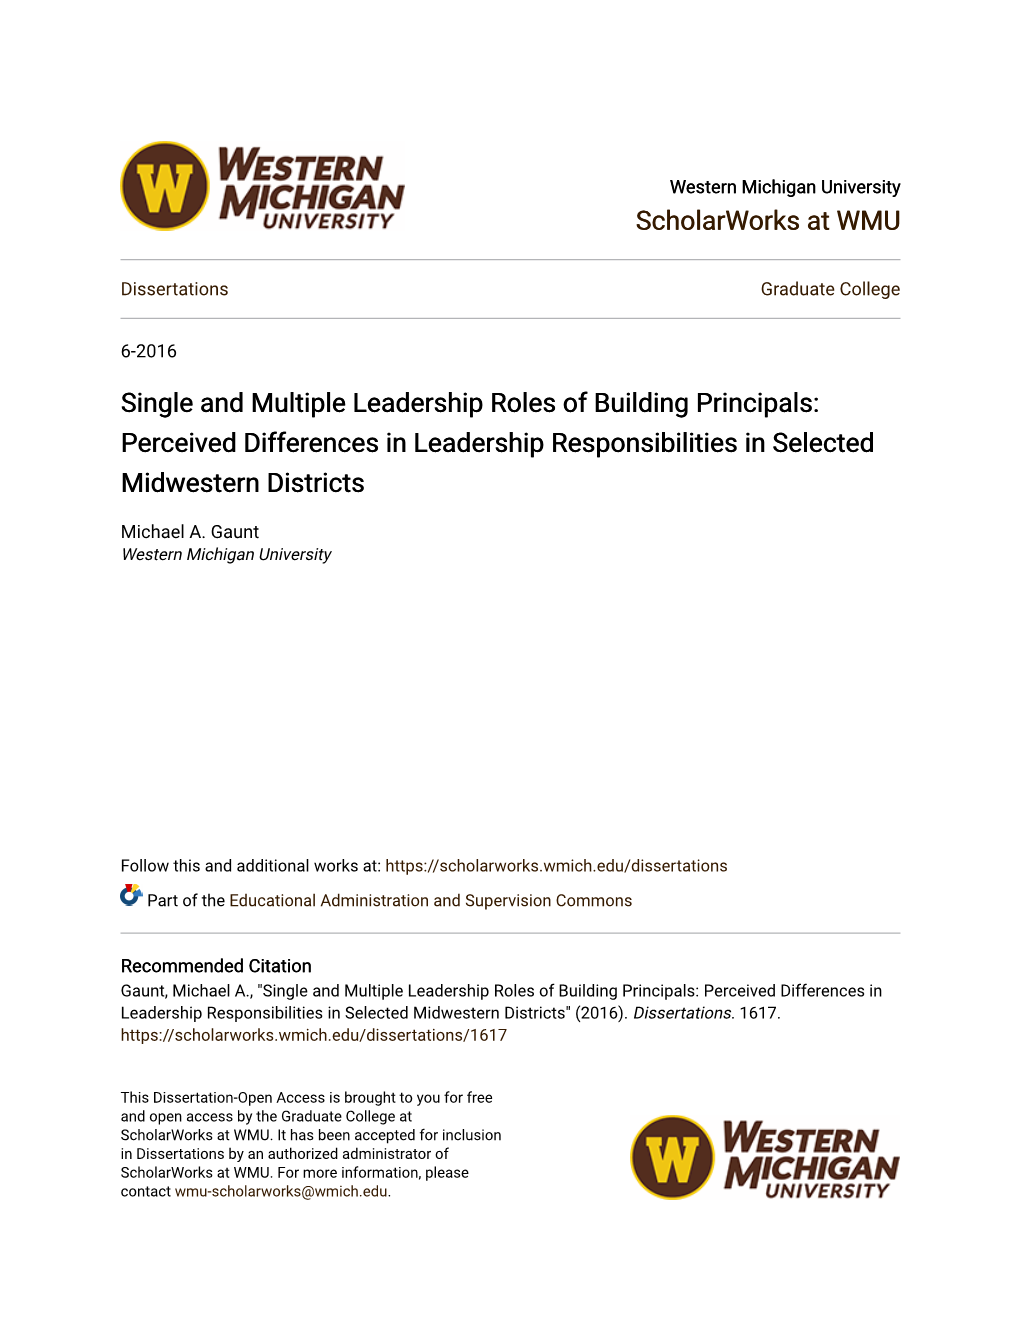 Single and Multiple Leadership Roles of Building Principals: Perceived Differences in Leadership Responsibilities in Selected Midwestern Districts